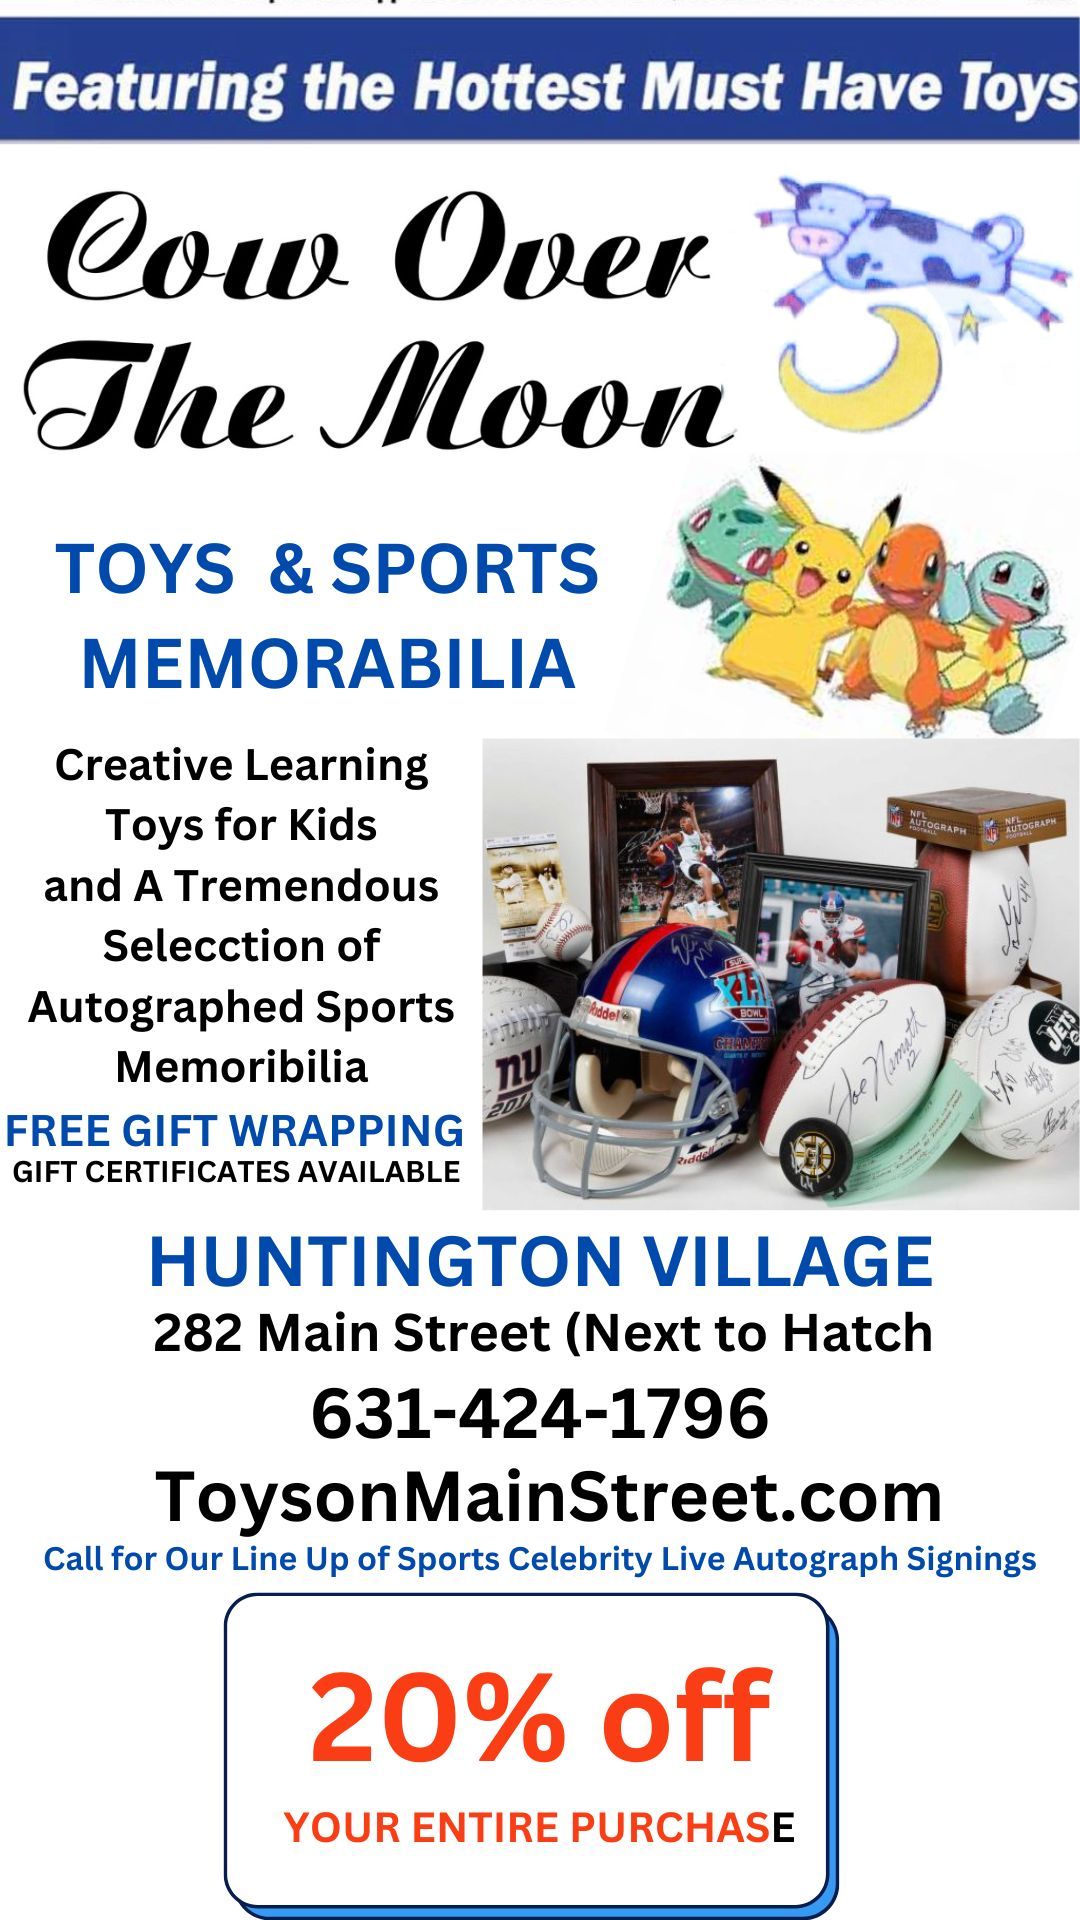 An advertisement for coin over the moon toys and sports memorabilia